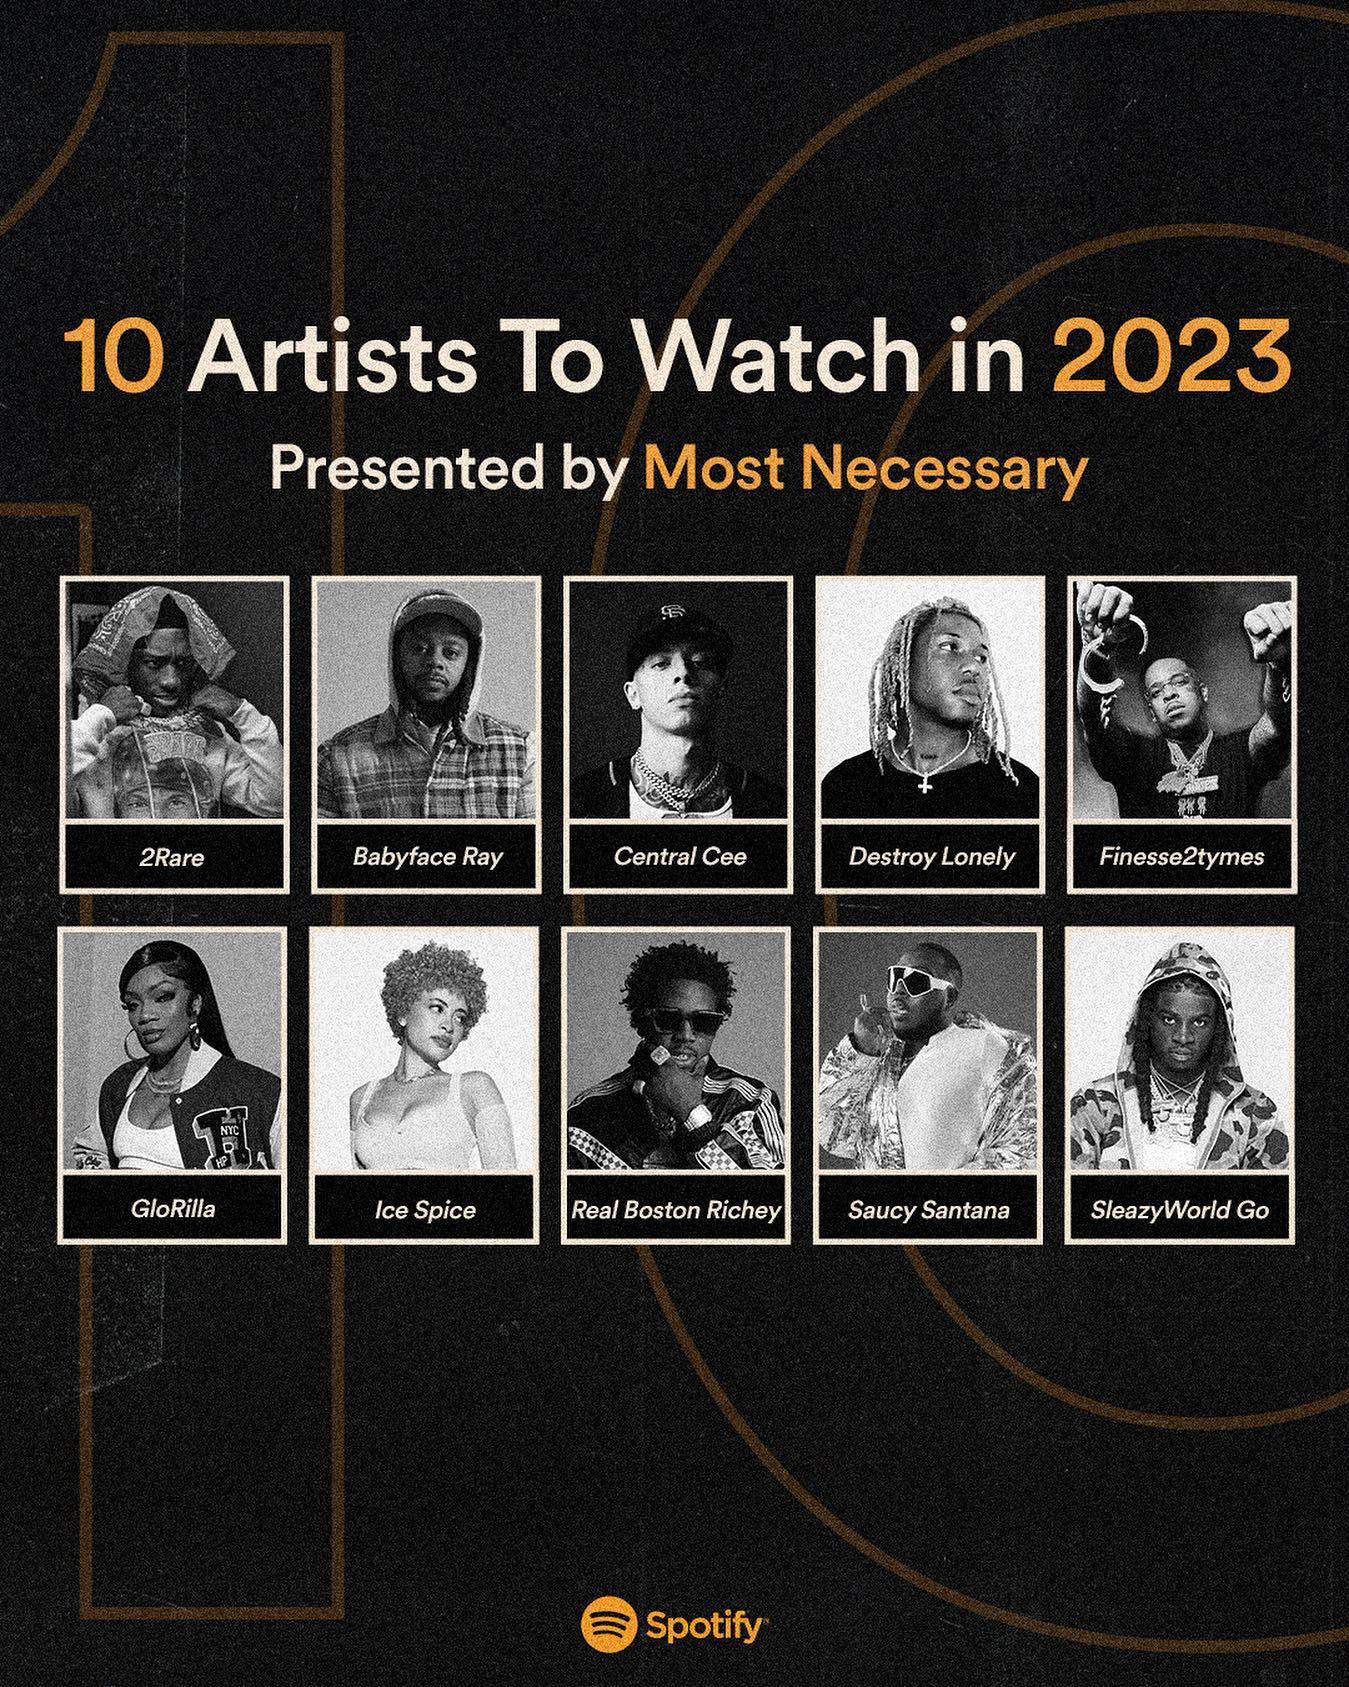 Spotify - These artists are giving us a lot to look forward to in 2023